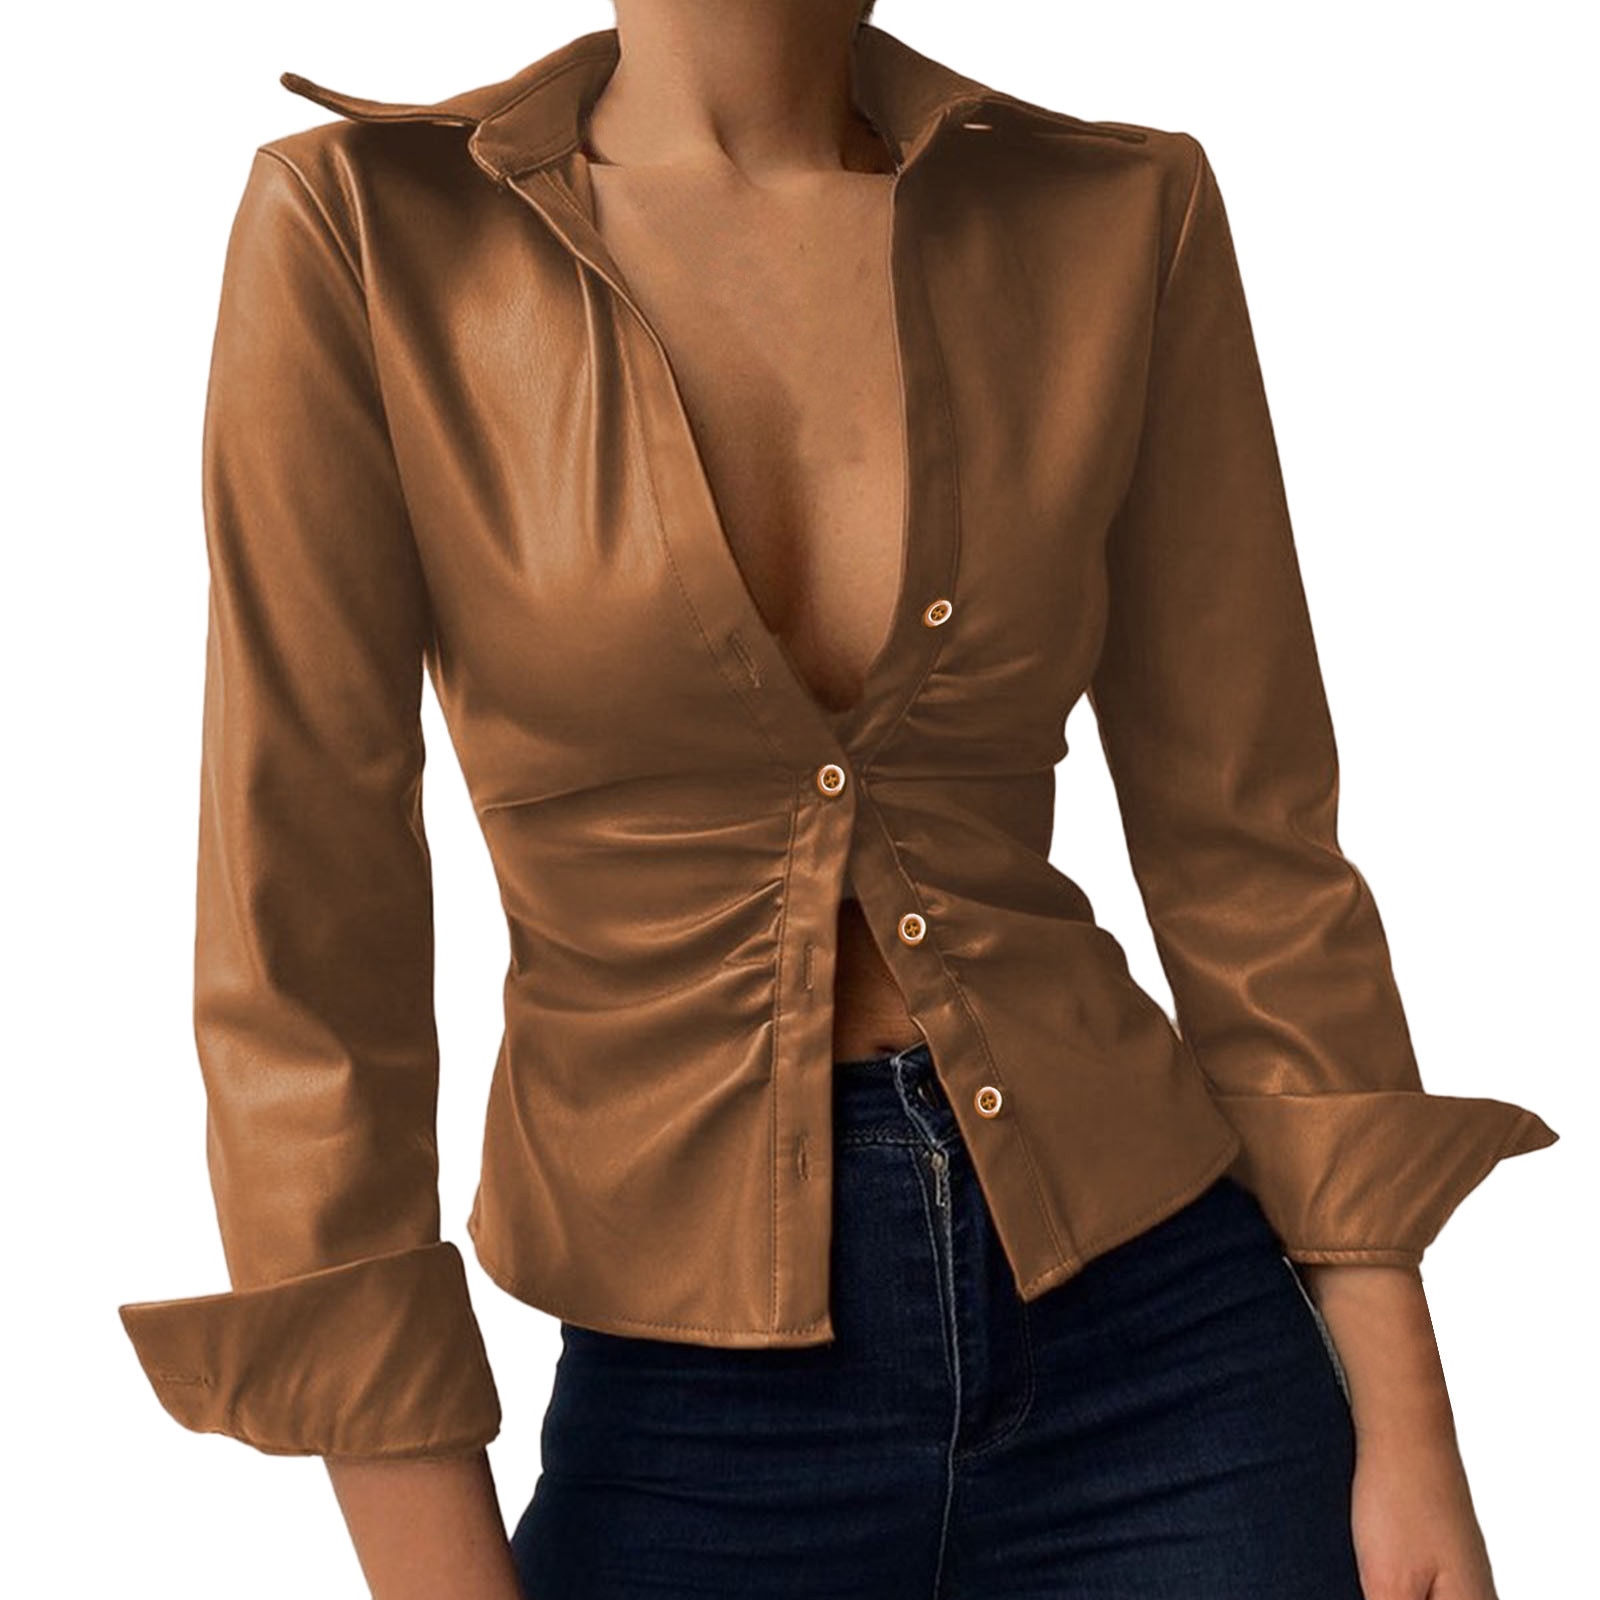 Fashion Leather Solid Blouse Shirt Casual Buttons Lapel Tops Casual Summer Ladies Female Women Long Sleeve Blusas